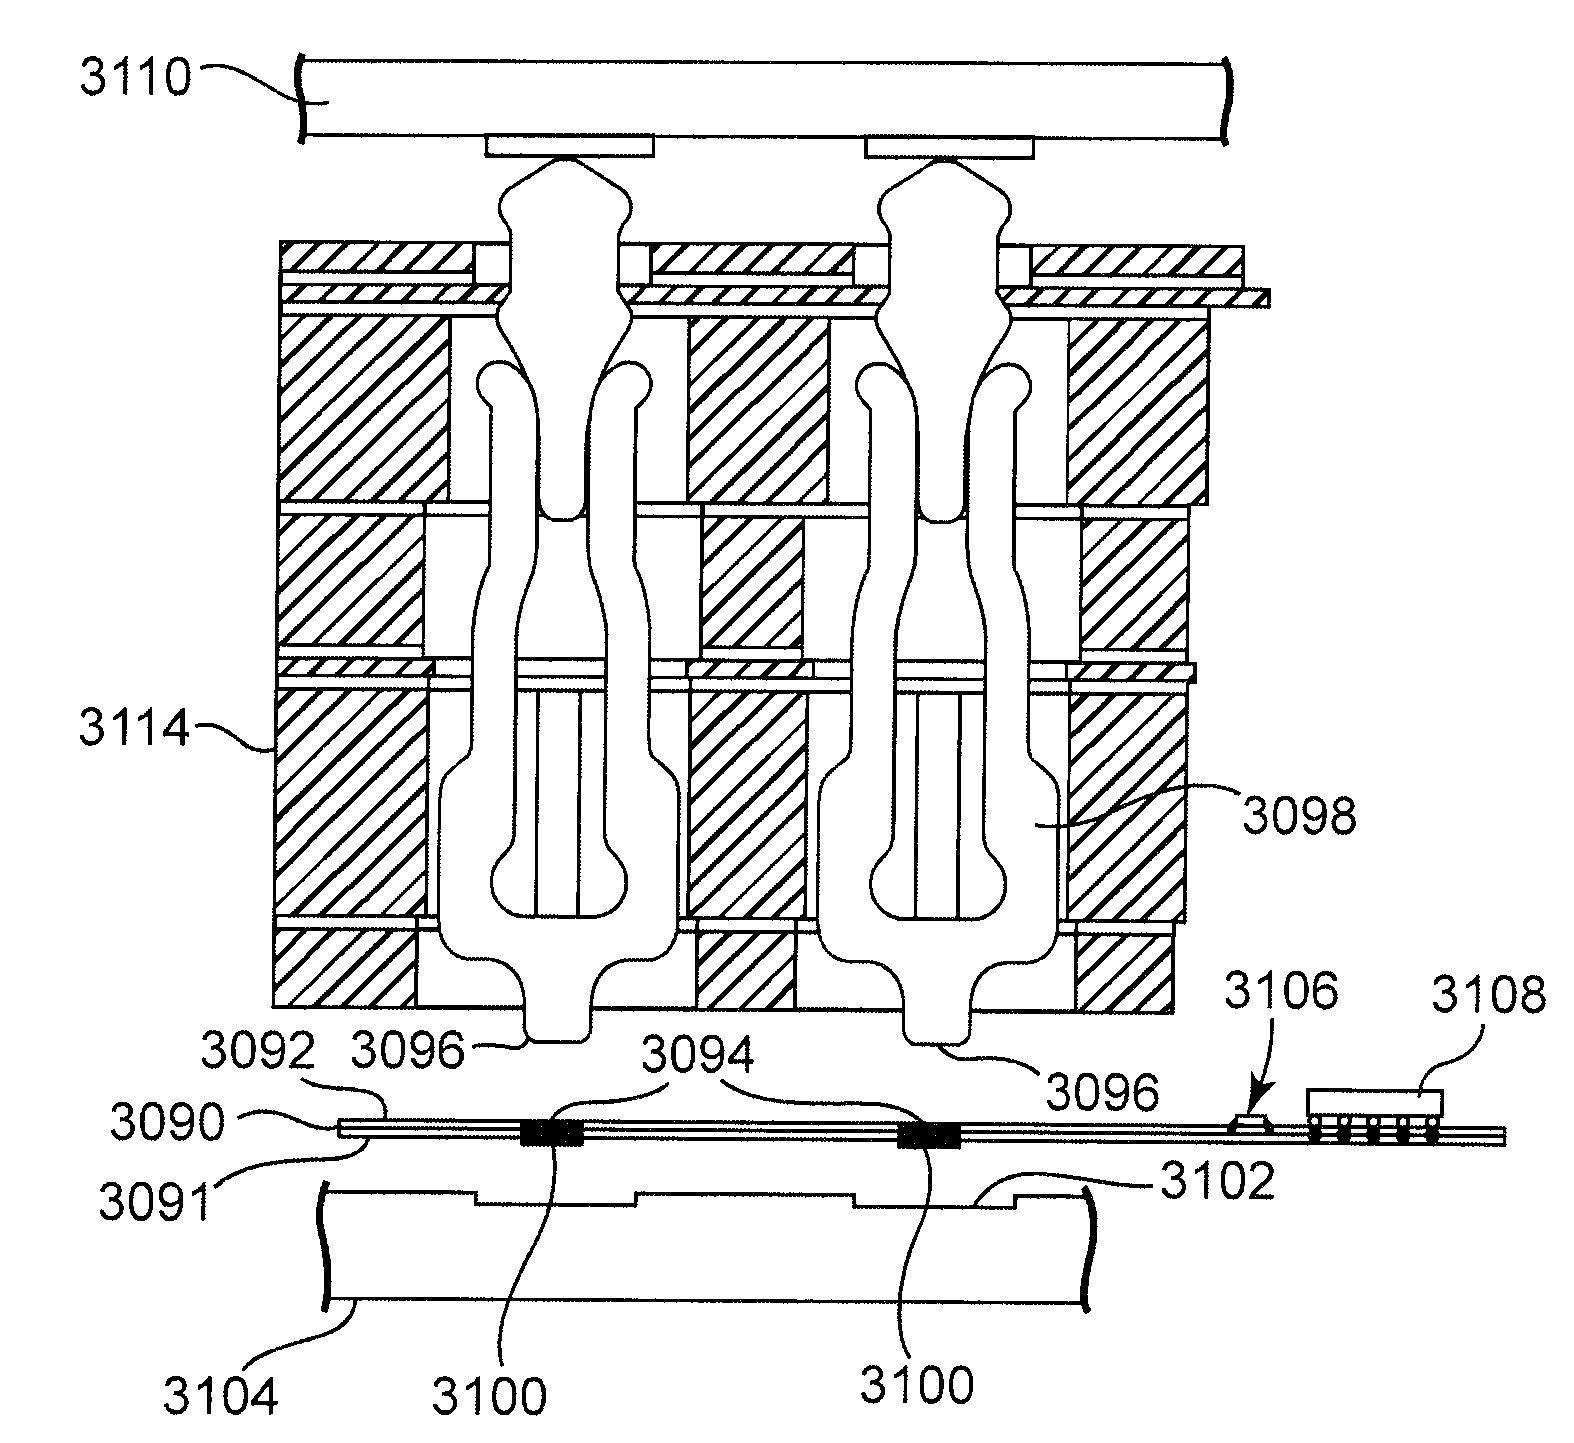 Fine pitch electrical interconnect assembly